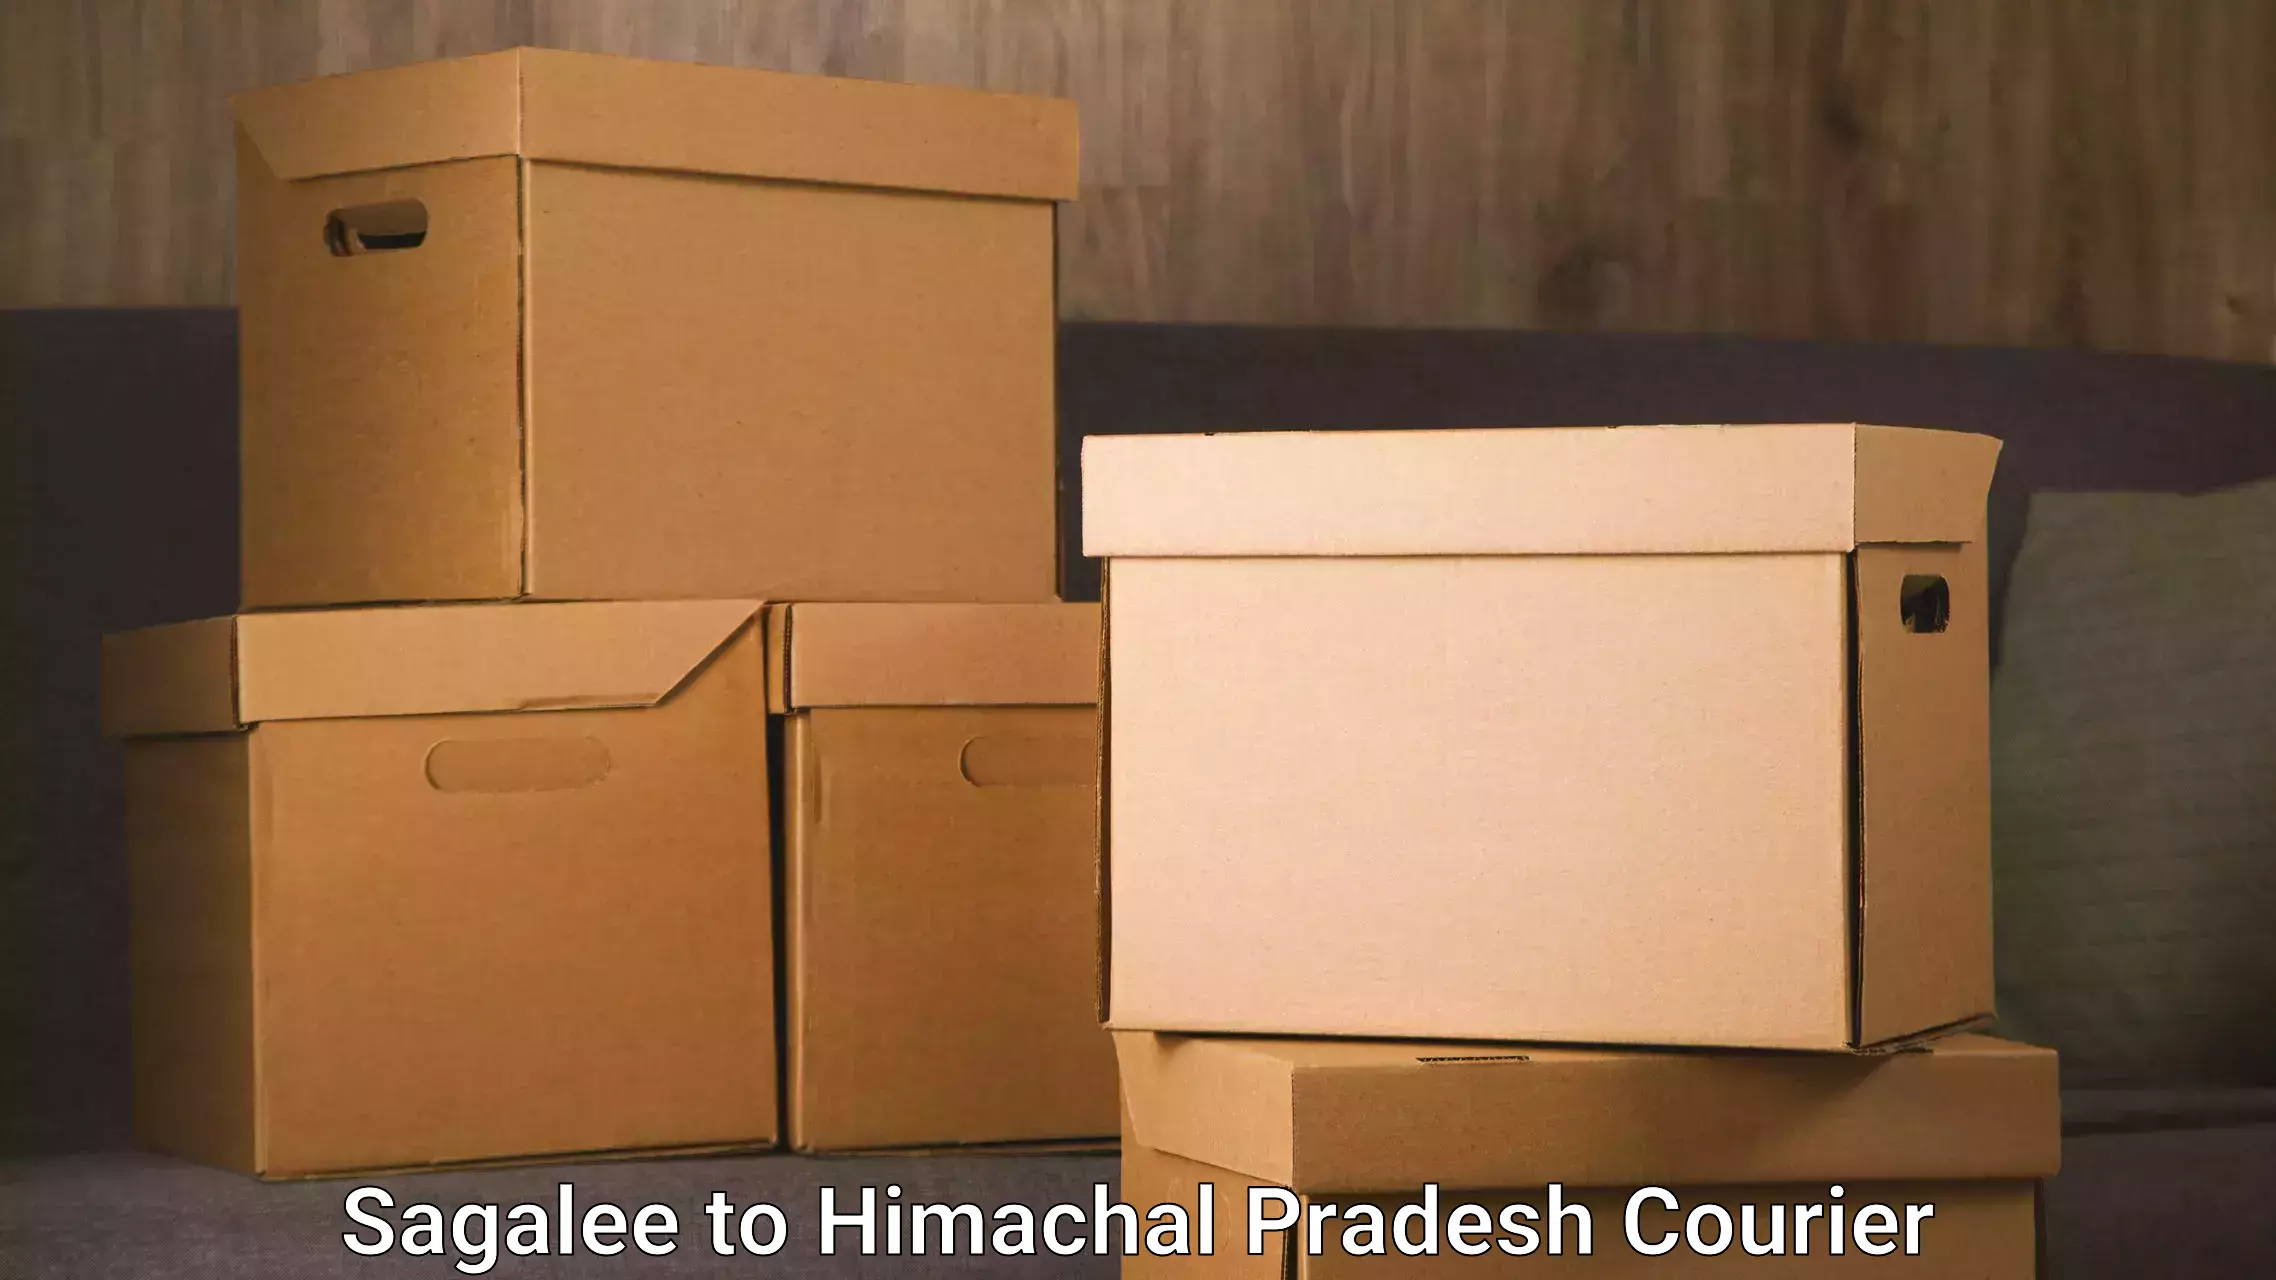 State-of-the-art courier technology Sagalee to Himachal Pradesh